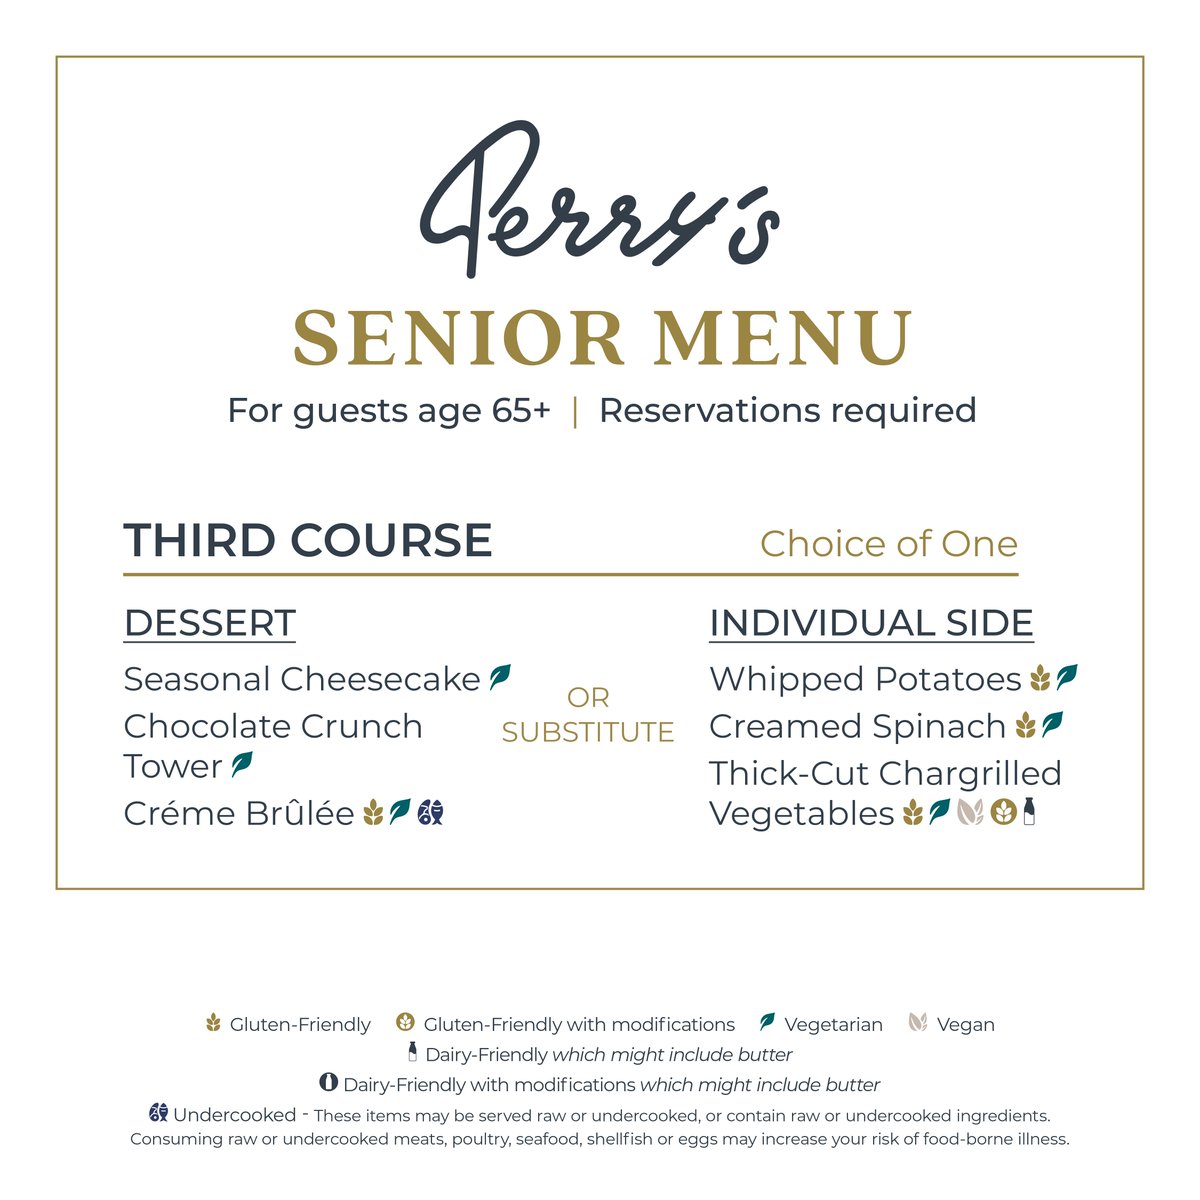 Tell your friends & family about Perry’s Senior Menu!

A $39 three course menu for guests 65+ available for DINE-IN only everyday before 6 PM always and ongoing. Your family and friends will thank you.

Make your reservation today at perryssteakhouse.com